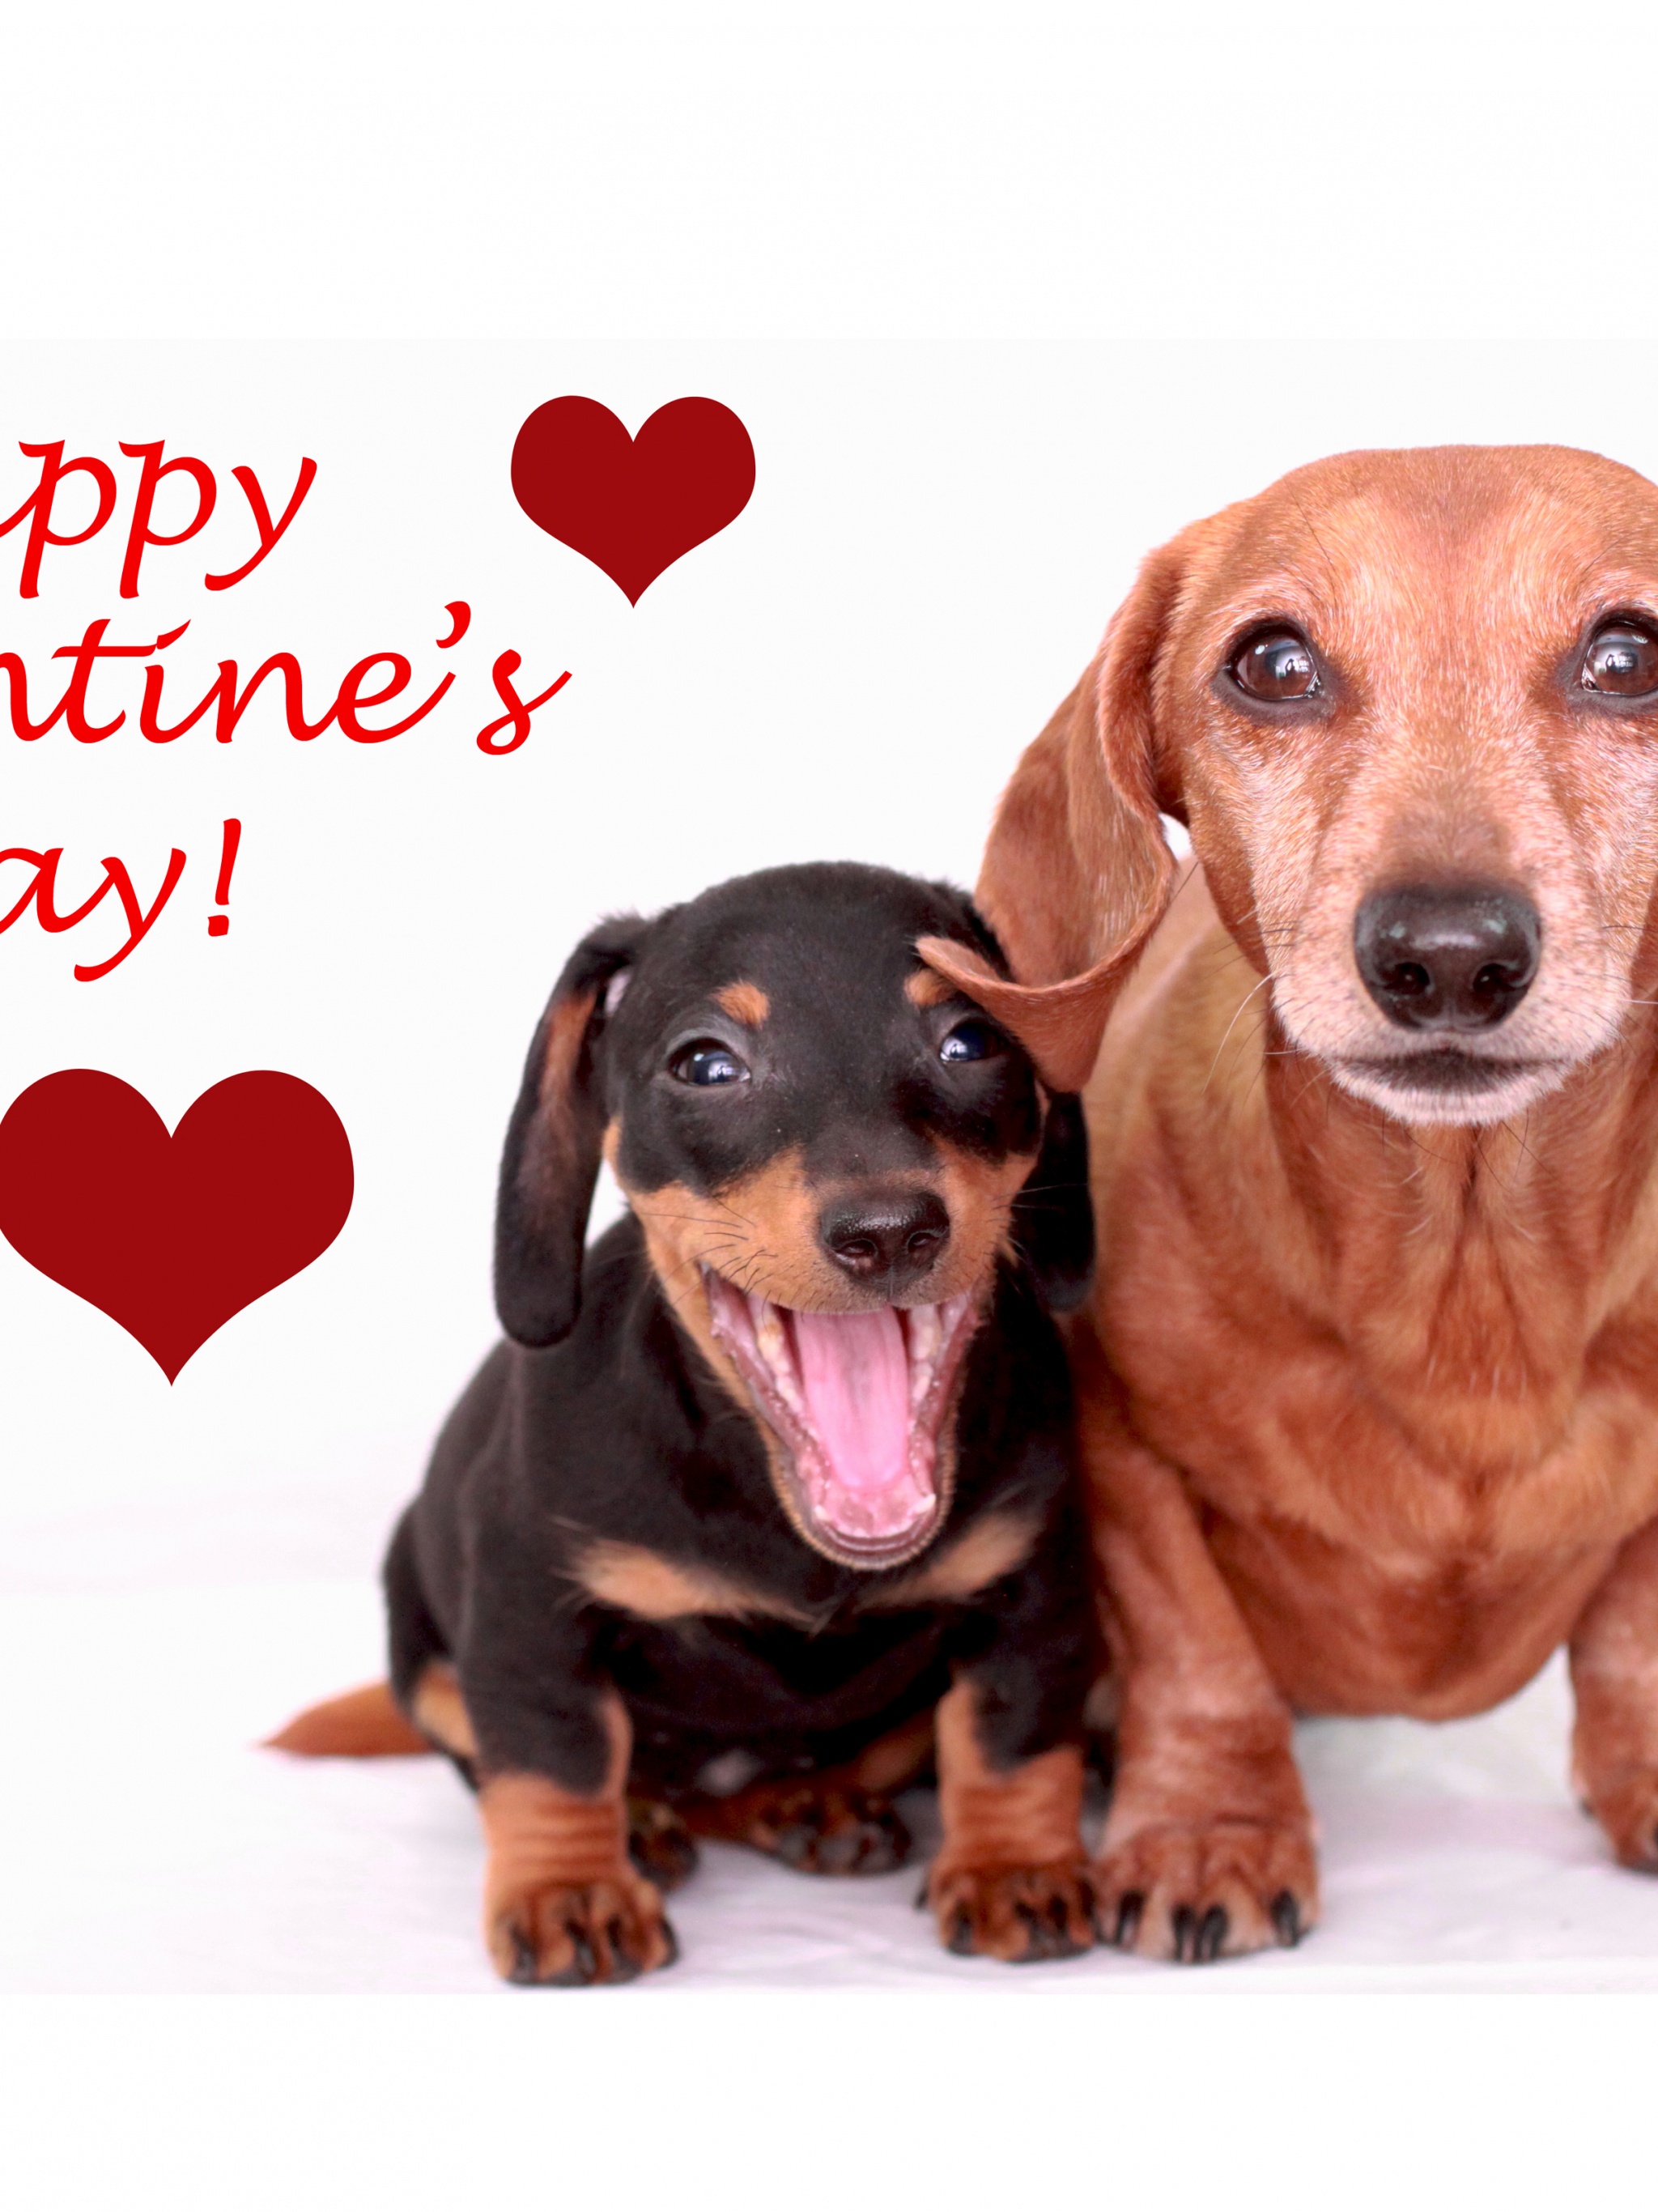 Cute Dogs - Happy Valentines Day